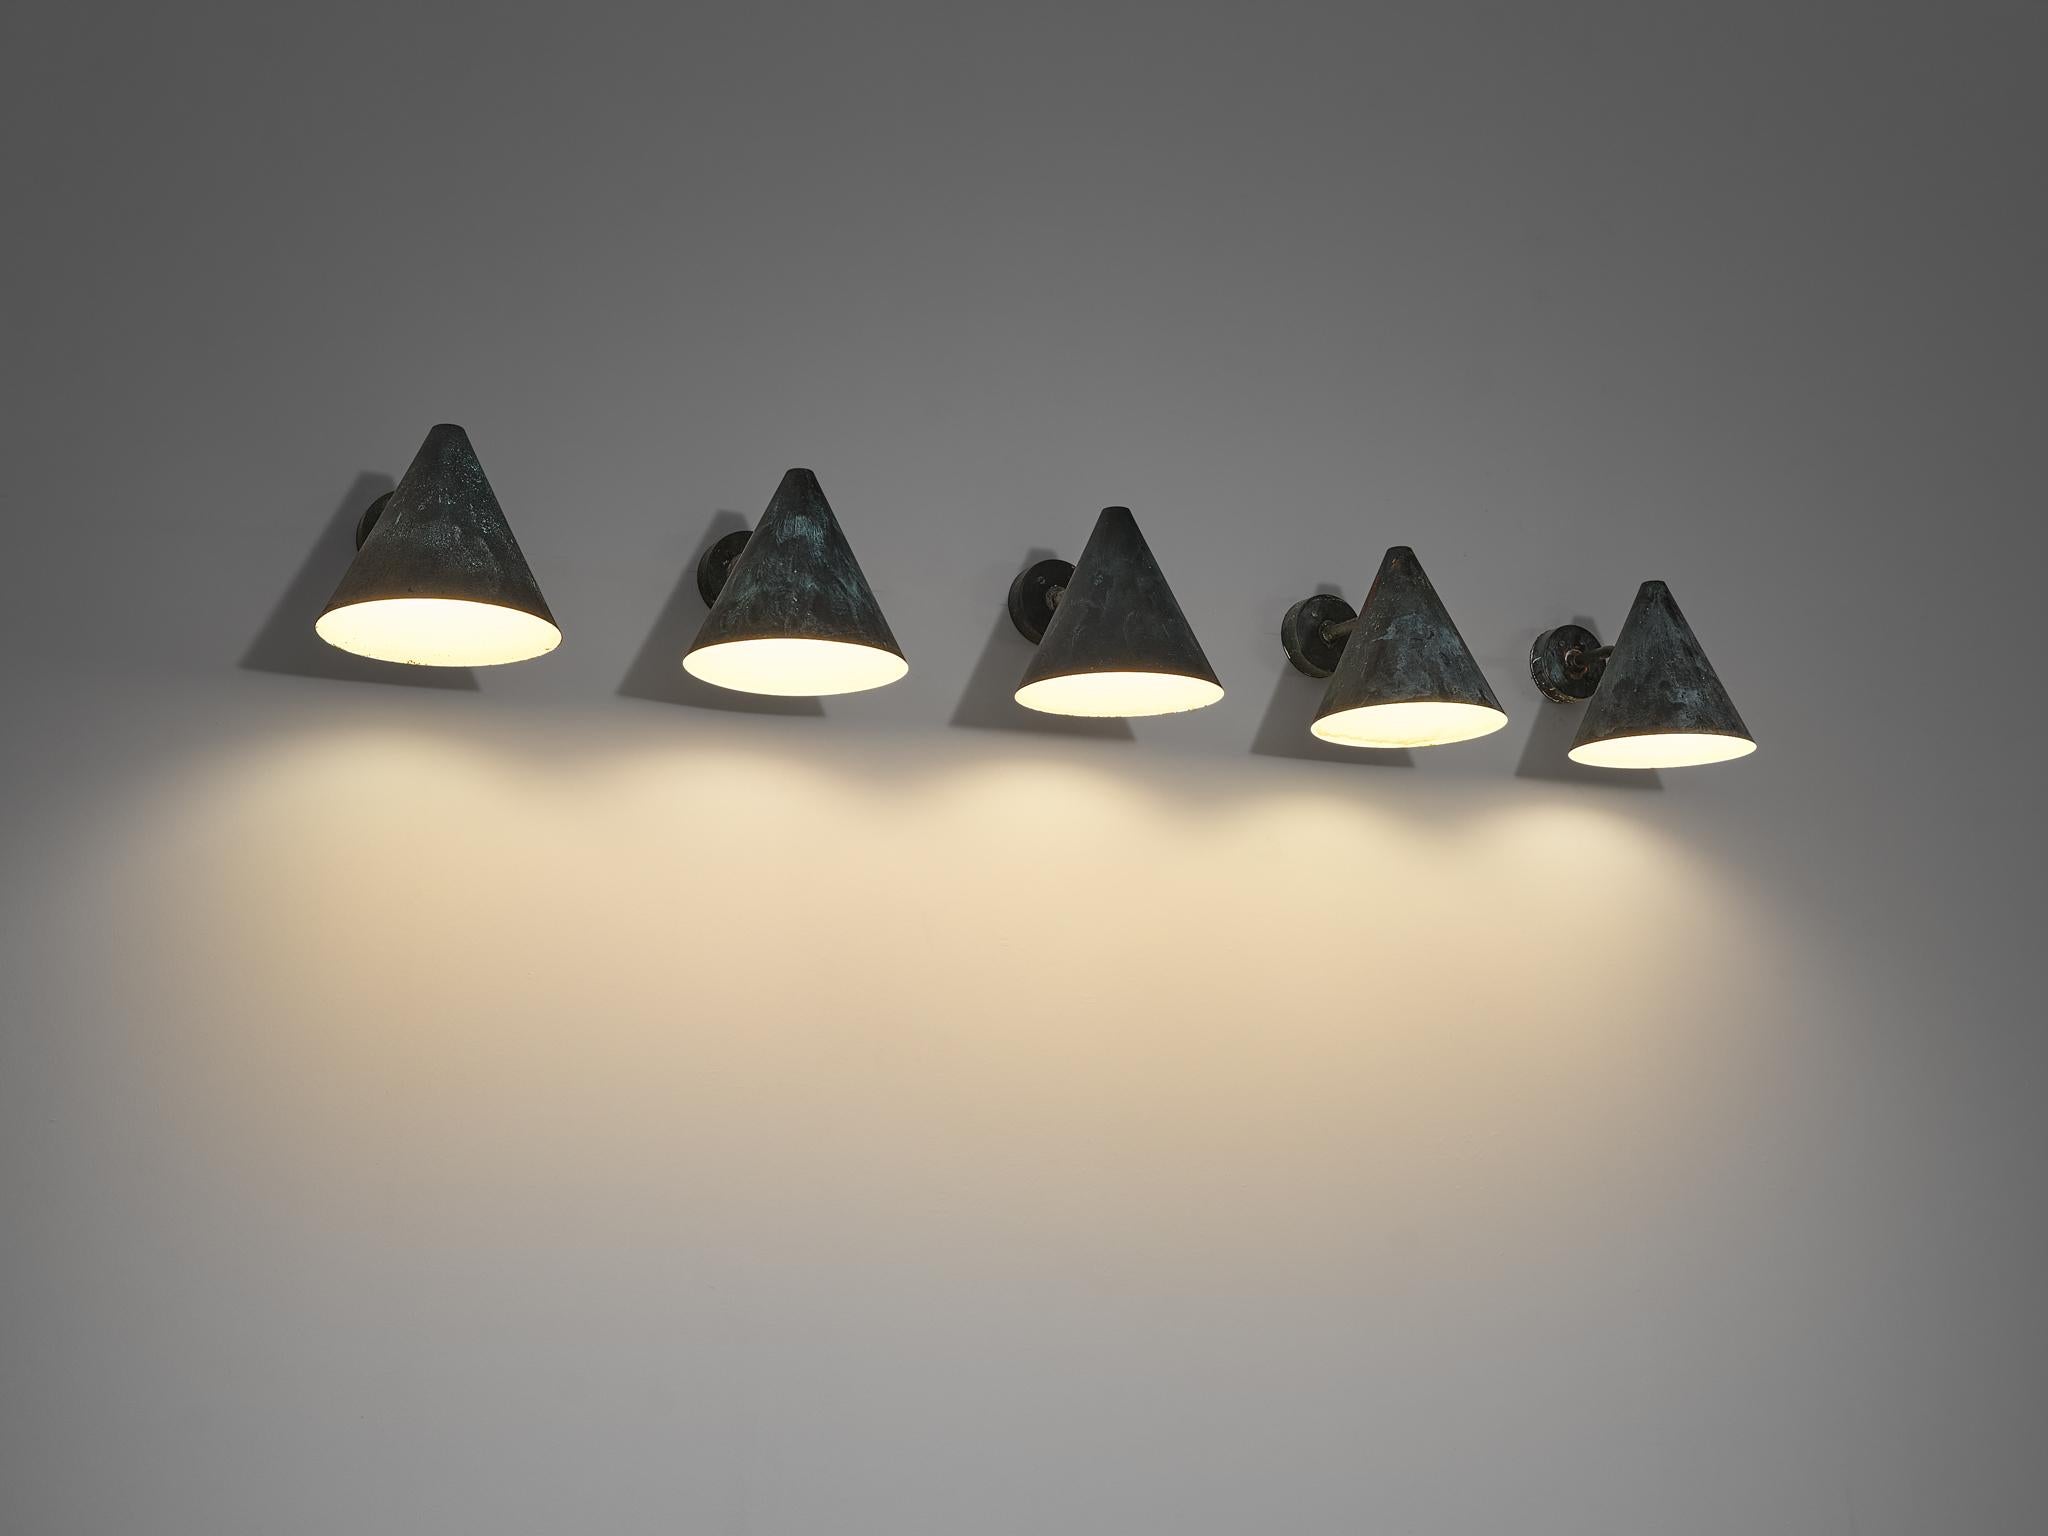  Hans-Agne Jakobsson 'Tratten' Wall Lights in Patinated Copper  For Sale 5